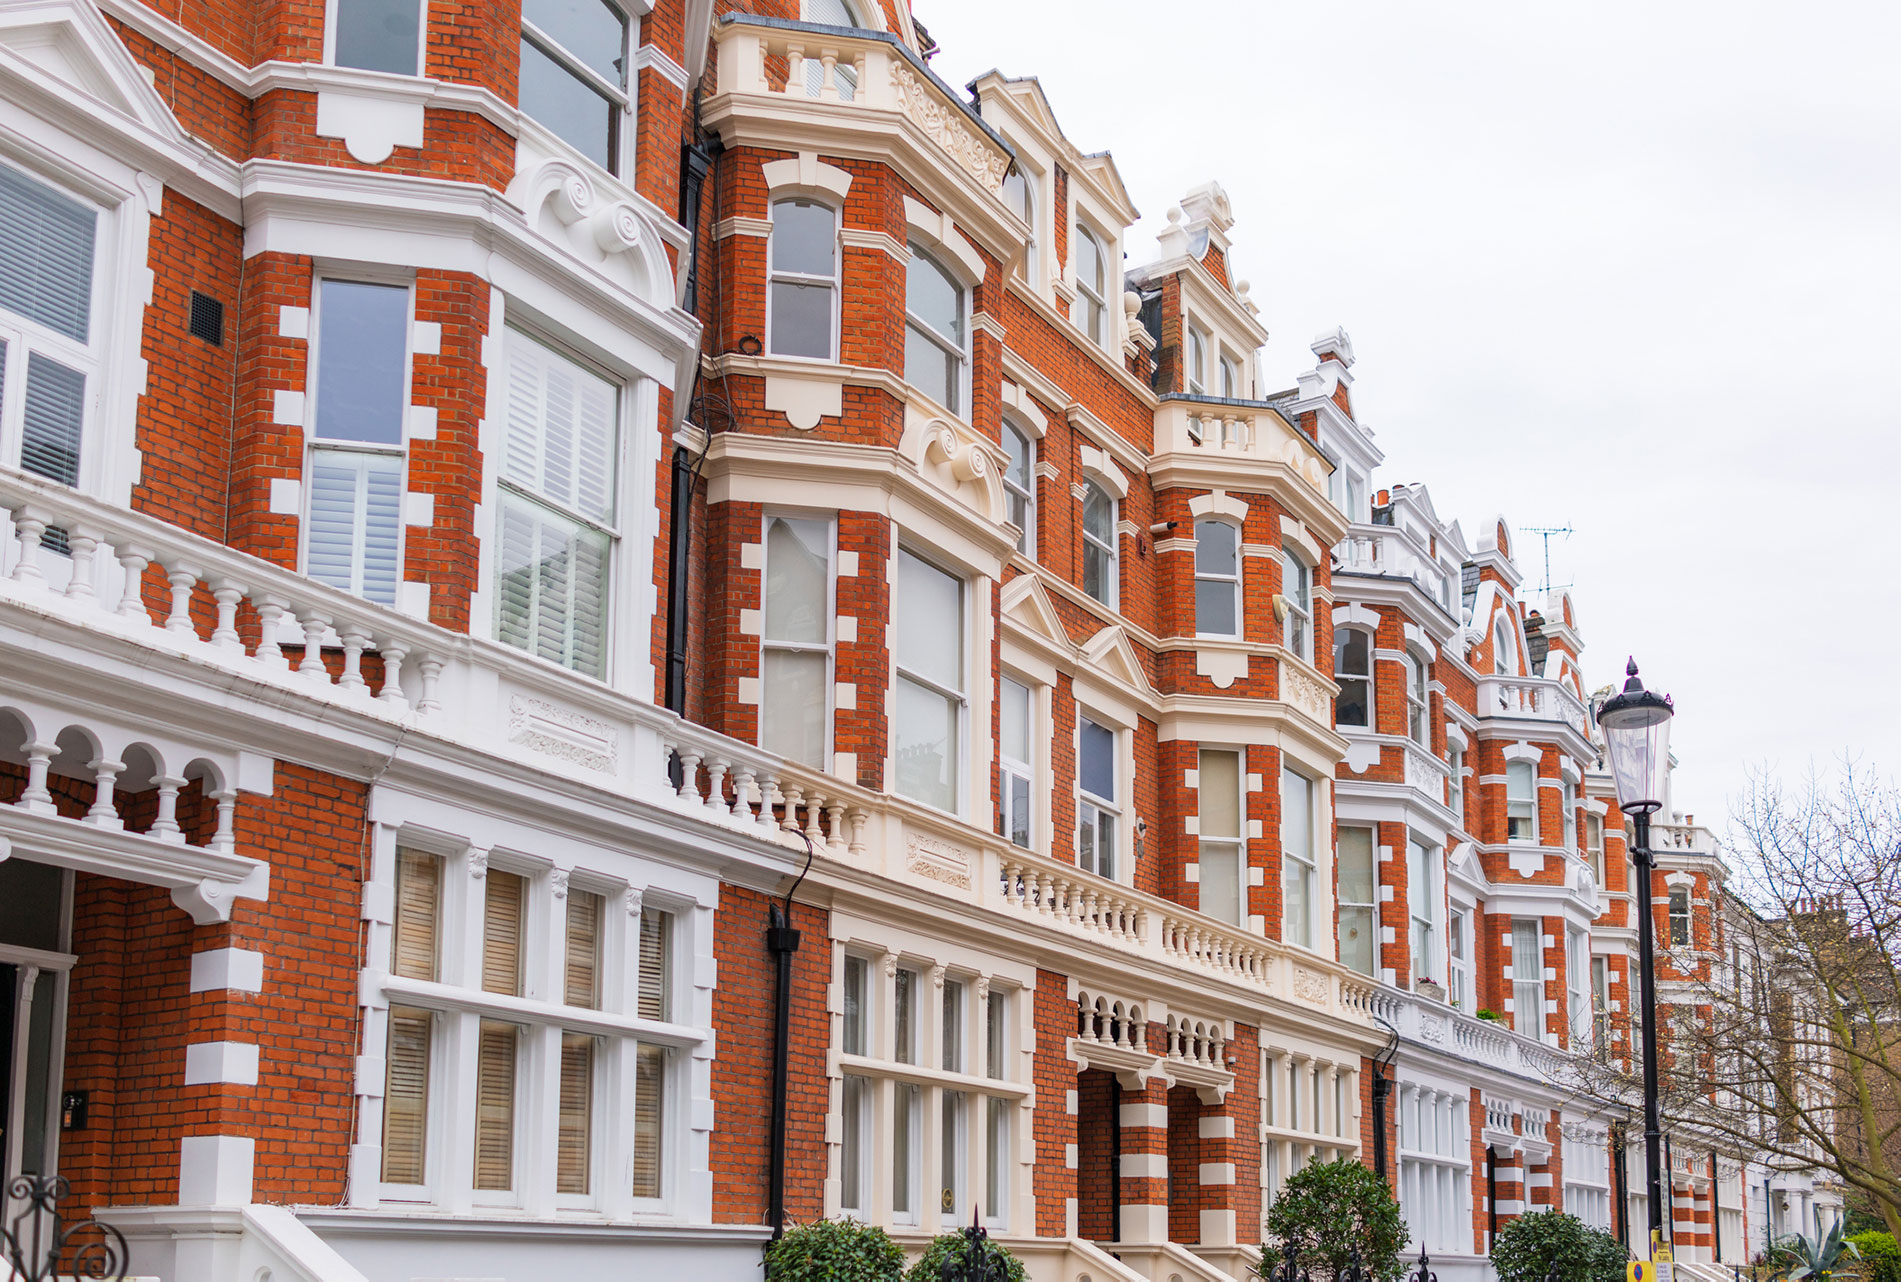 A street made up of brick-built apartments and townhouses in South Kensington, London